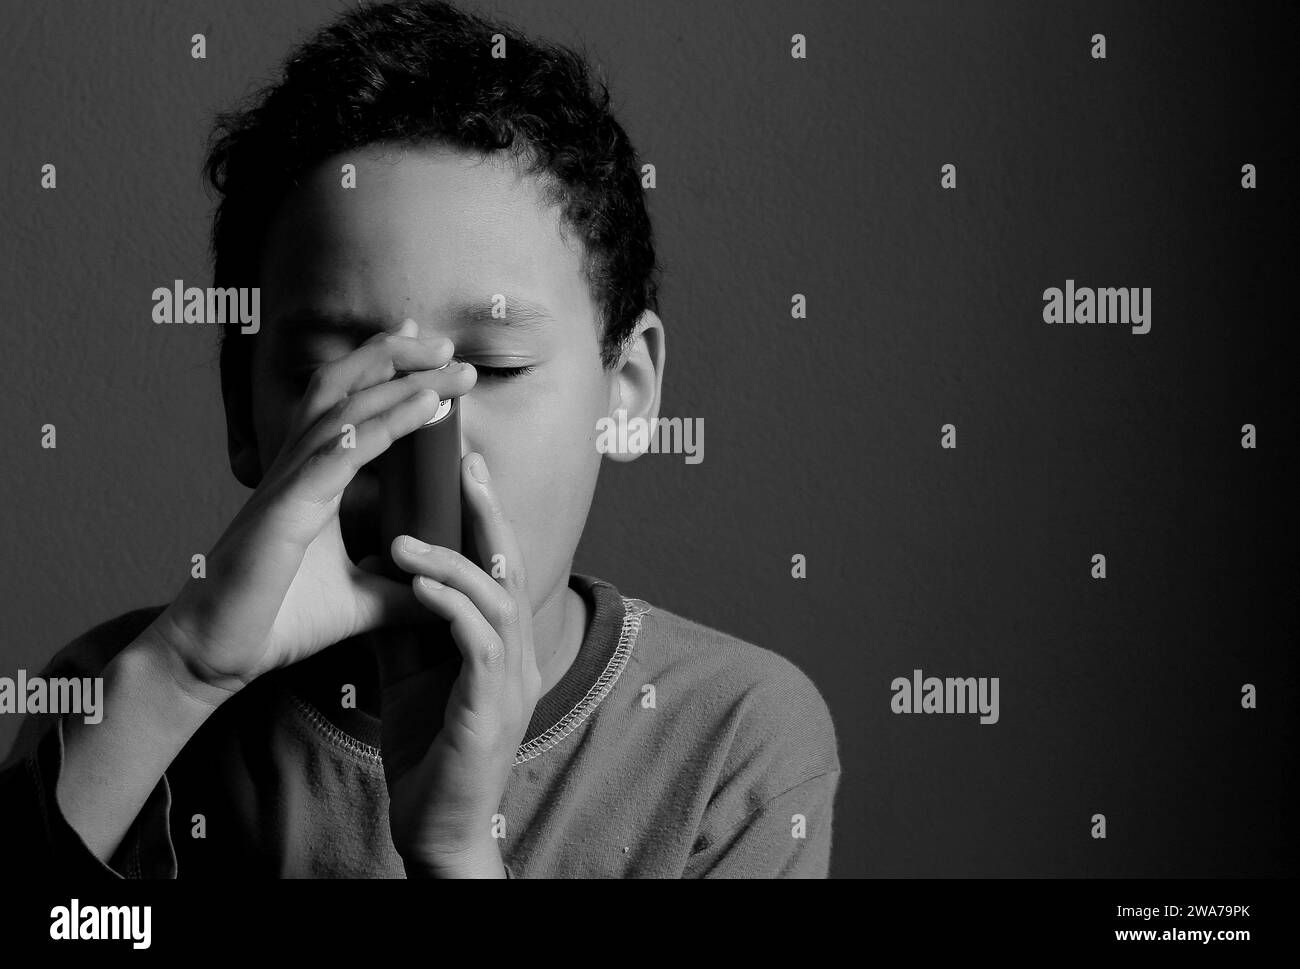 child with flu with inhaler respiratory puff on grey background with people stock photo Stock Photo